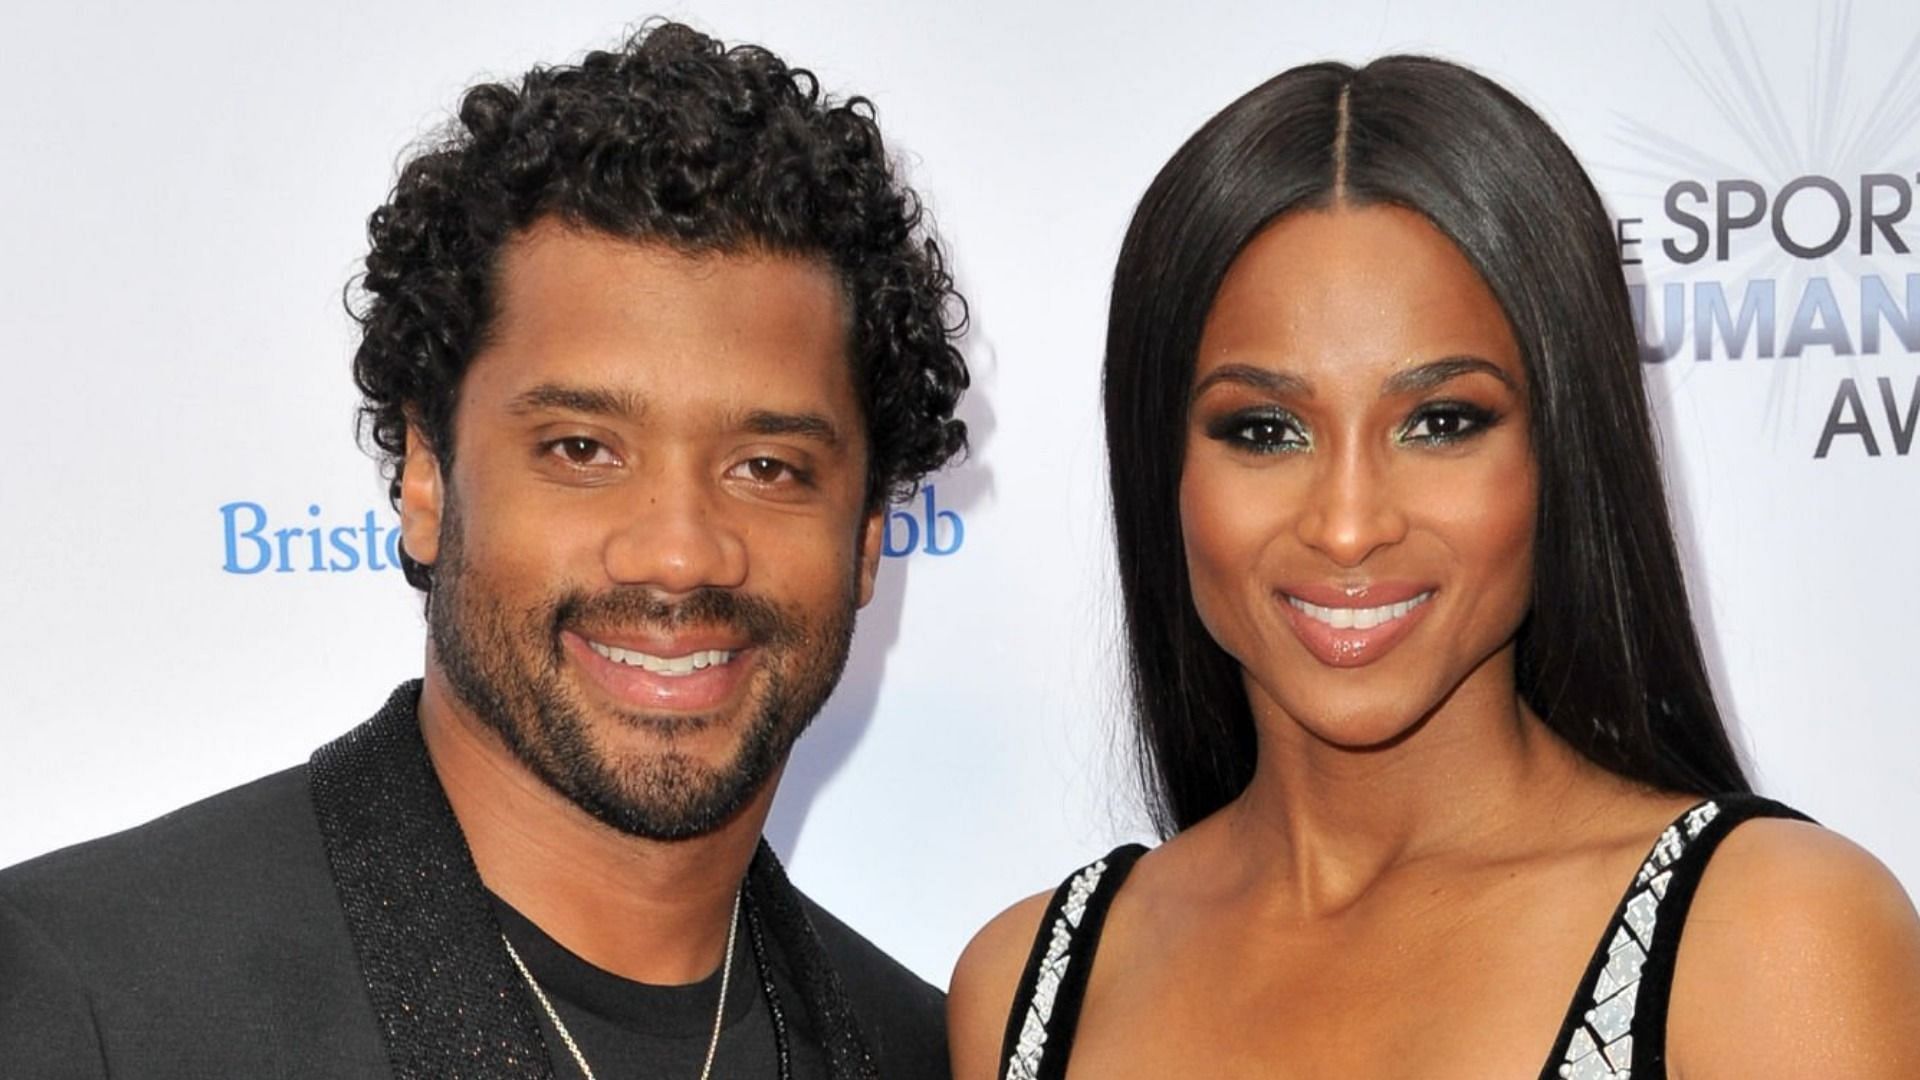 Russell Wilson asked Ciara if they can have more children during The Ellen DeGeneres Show (Image via Allen Berezovsky/Getty Images)